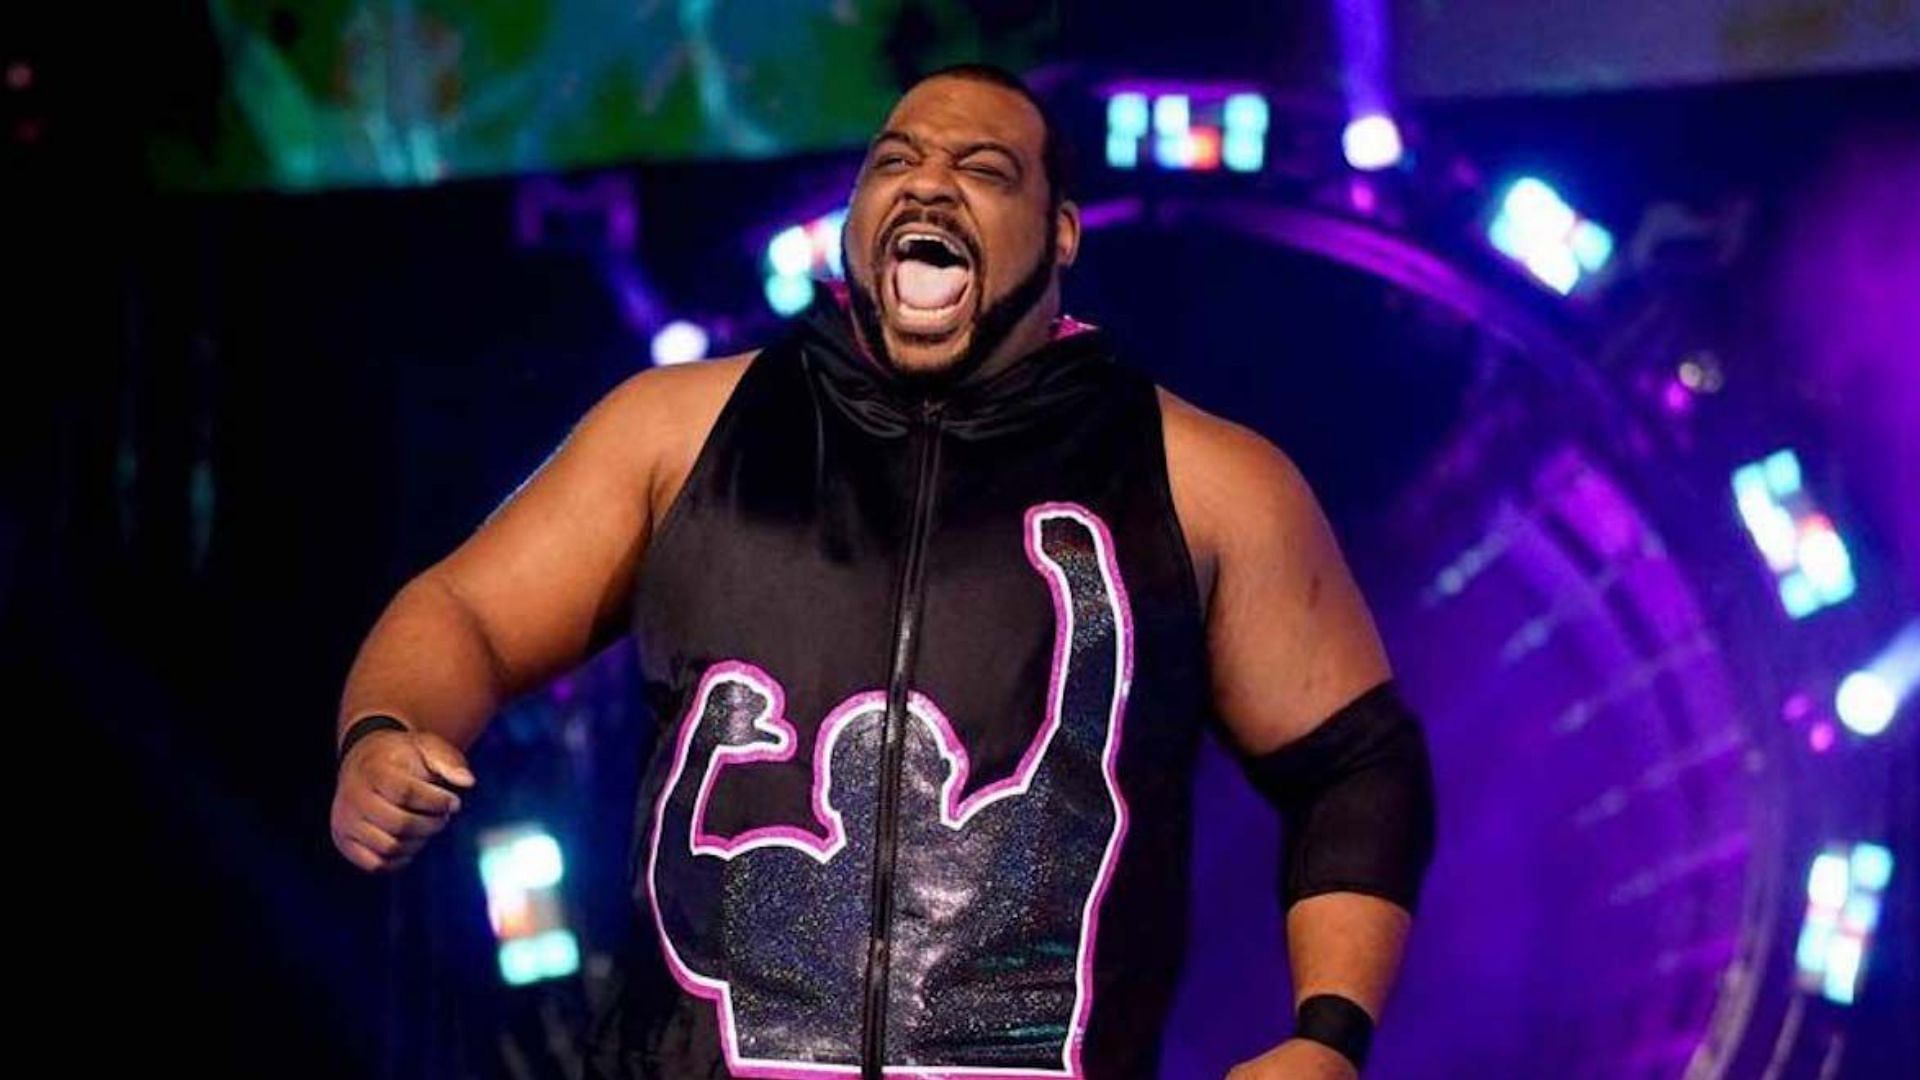 Former WWE Superstar and current AEW Tag Team Champion Keith Lee